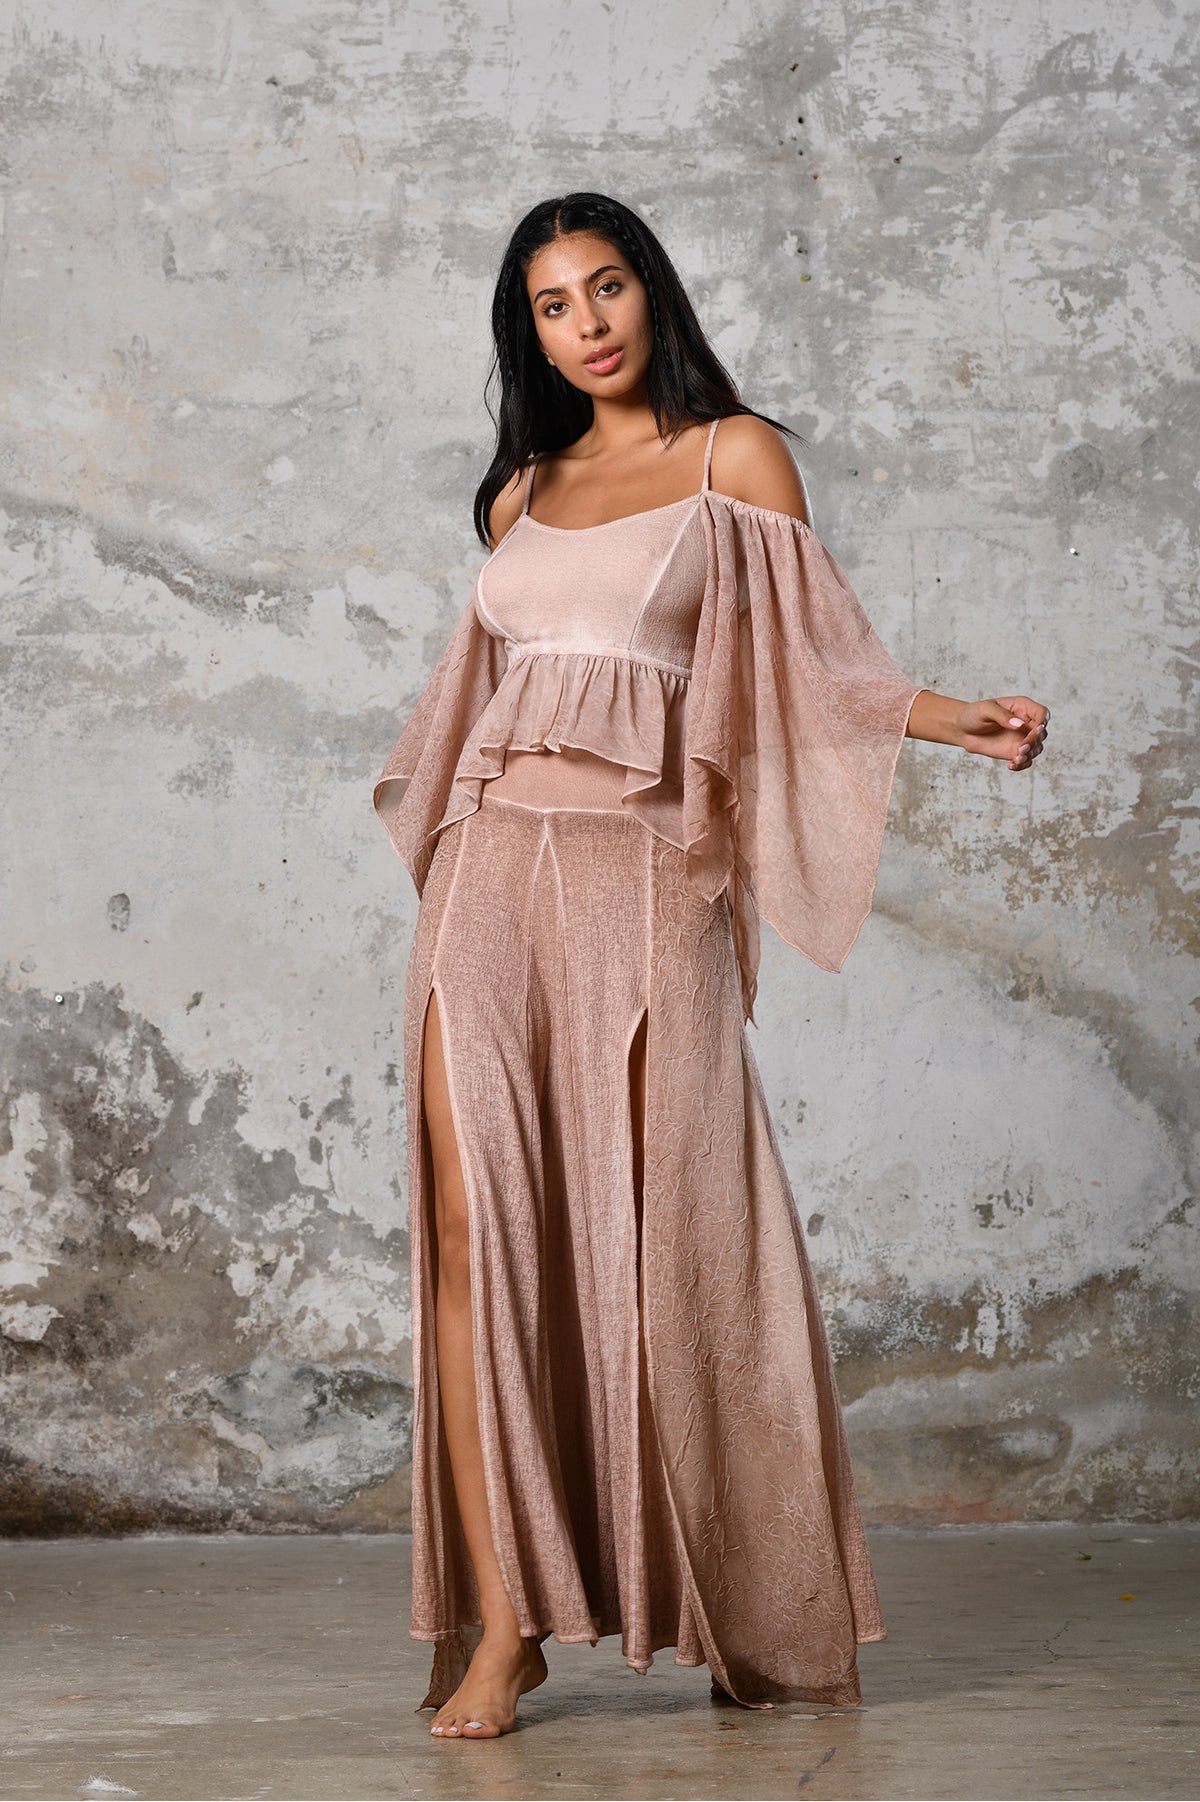 An enchanting Bohemian Venus Powder pink blouse, perfect for boho and festival-inspired looks, exuding a goddess-like quality. The creamy white, flowy fabric and intricate side details create an ethereal, bohemian style perfect for Burning Man and other occasions. This garment is an ethically crafted gem